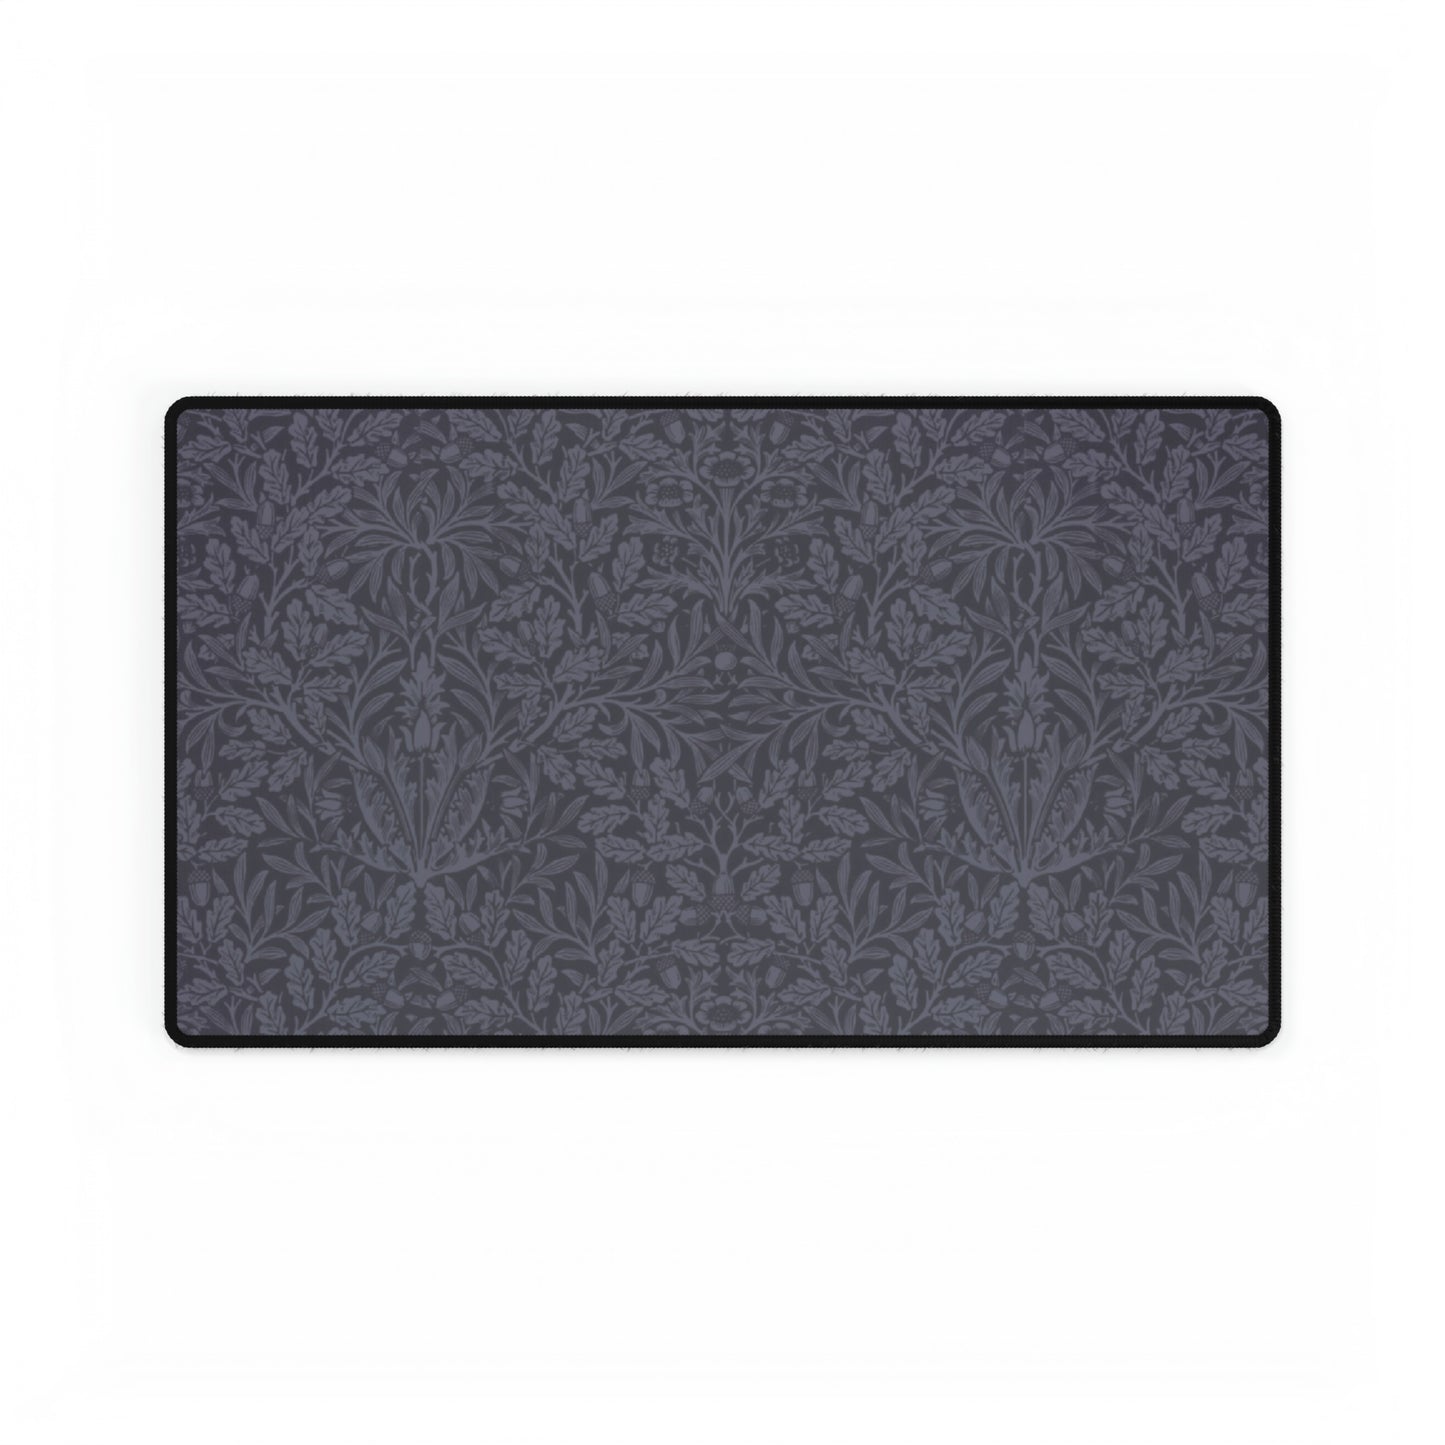 william-morris-co-desk-mats-acorns-and-oak-leaves-collection-smokey-blue-11